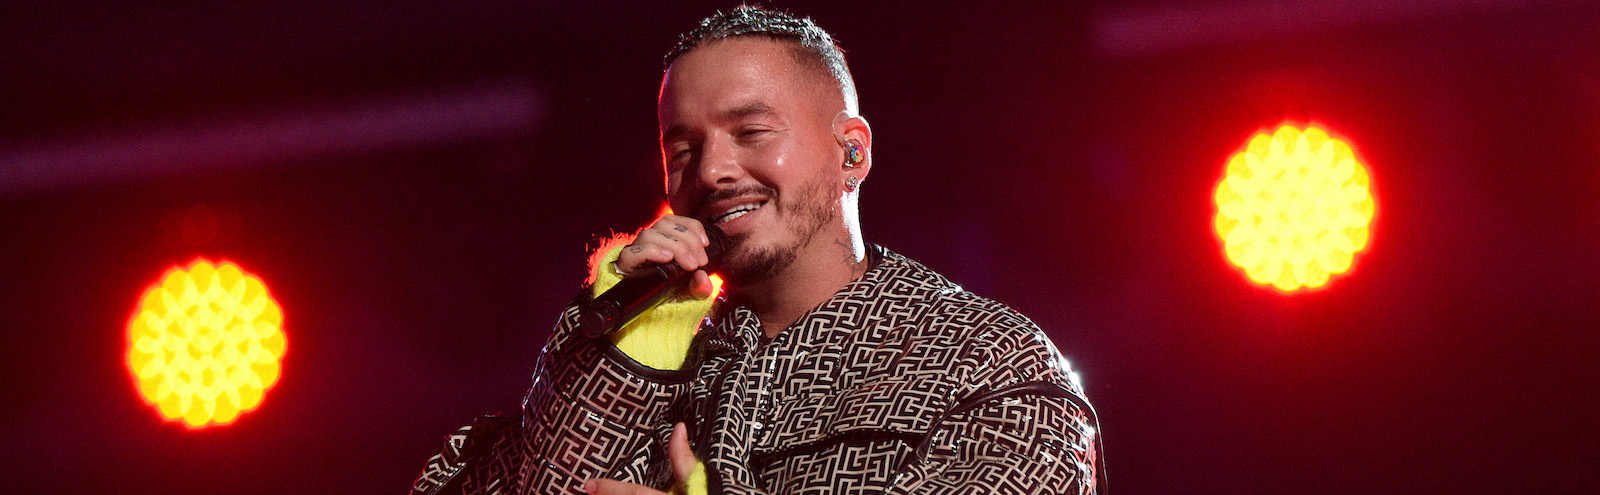 J Balvin will be named 'Latin Fashion Icon of the Year